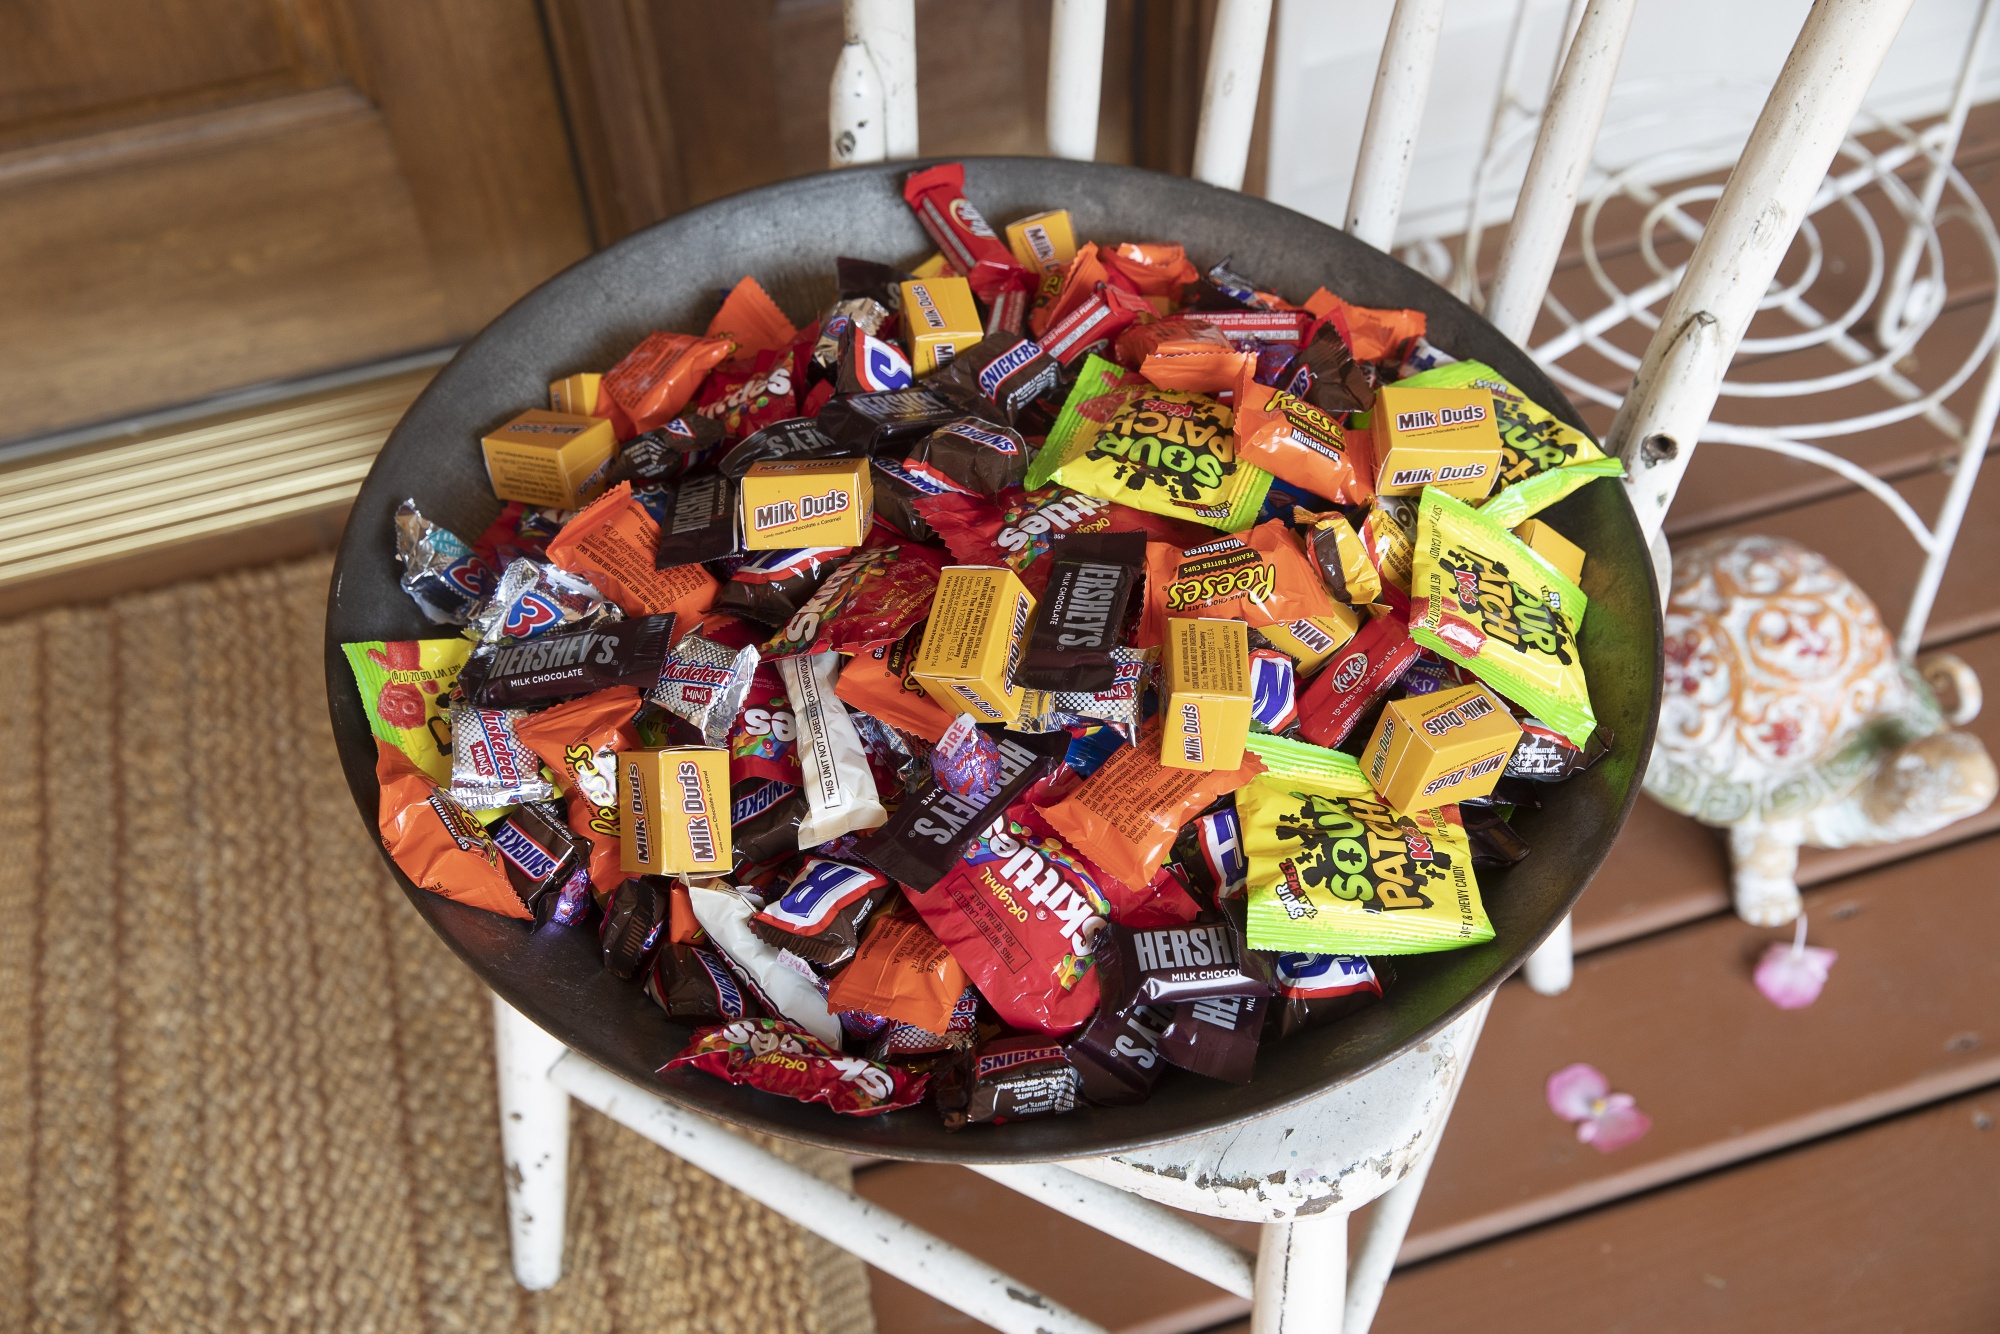 Mars, Inc., Hershey Co. and Mondelez International brand candy is displayed for a photograph in Tiskilwa, Illinois, U.S., on Sunday, Sept. 20, 2020.